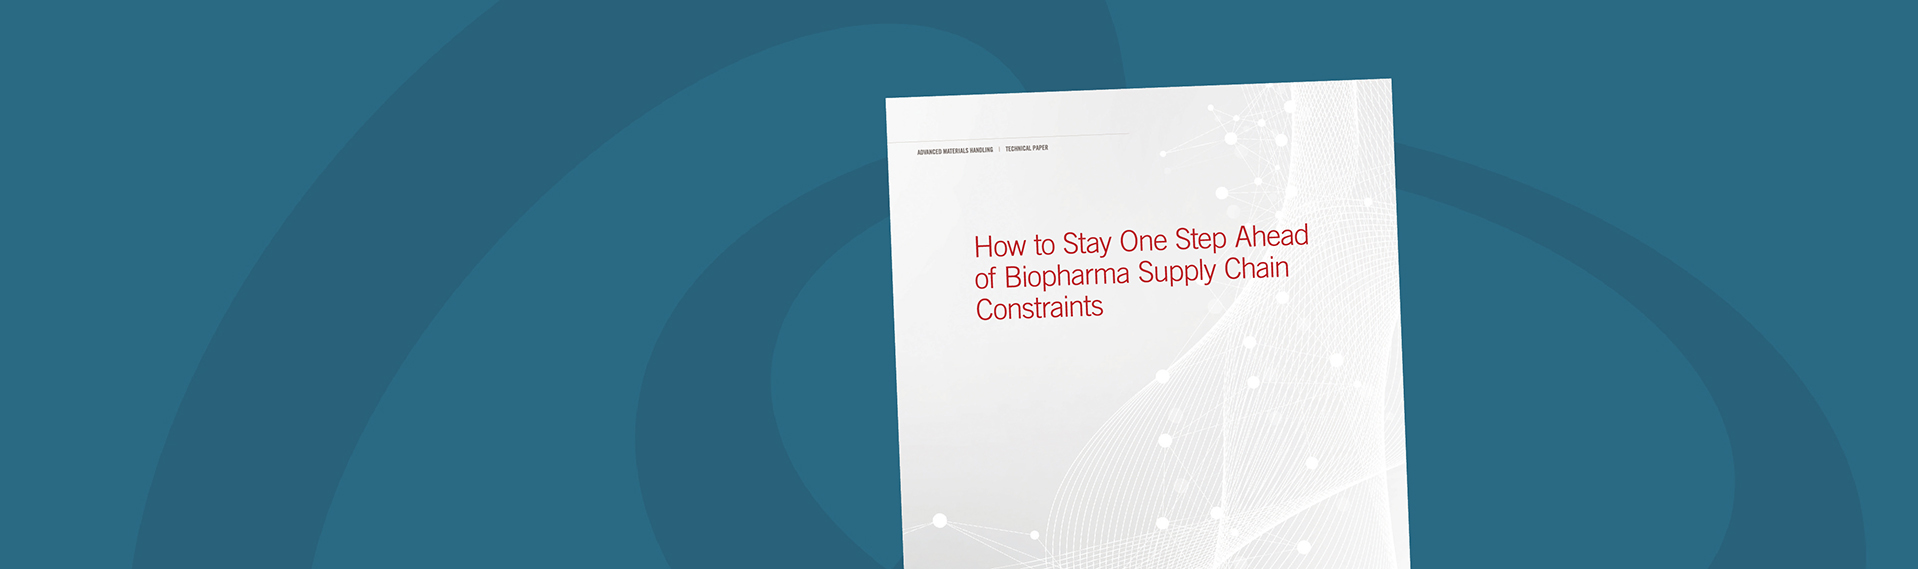 mixing-sys-how-to-stay-ahead-of-biopharma-sc-tp-hubspot-11733-desktop-1918x568